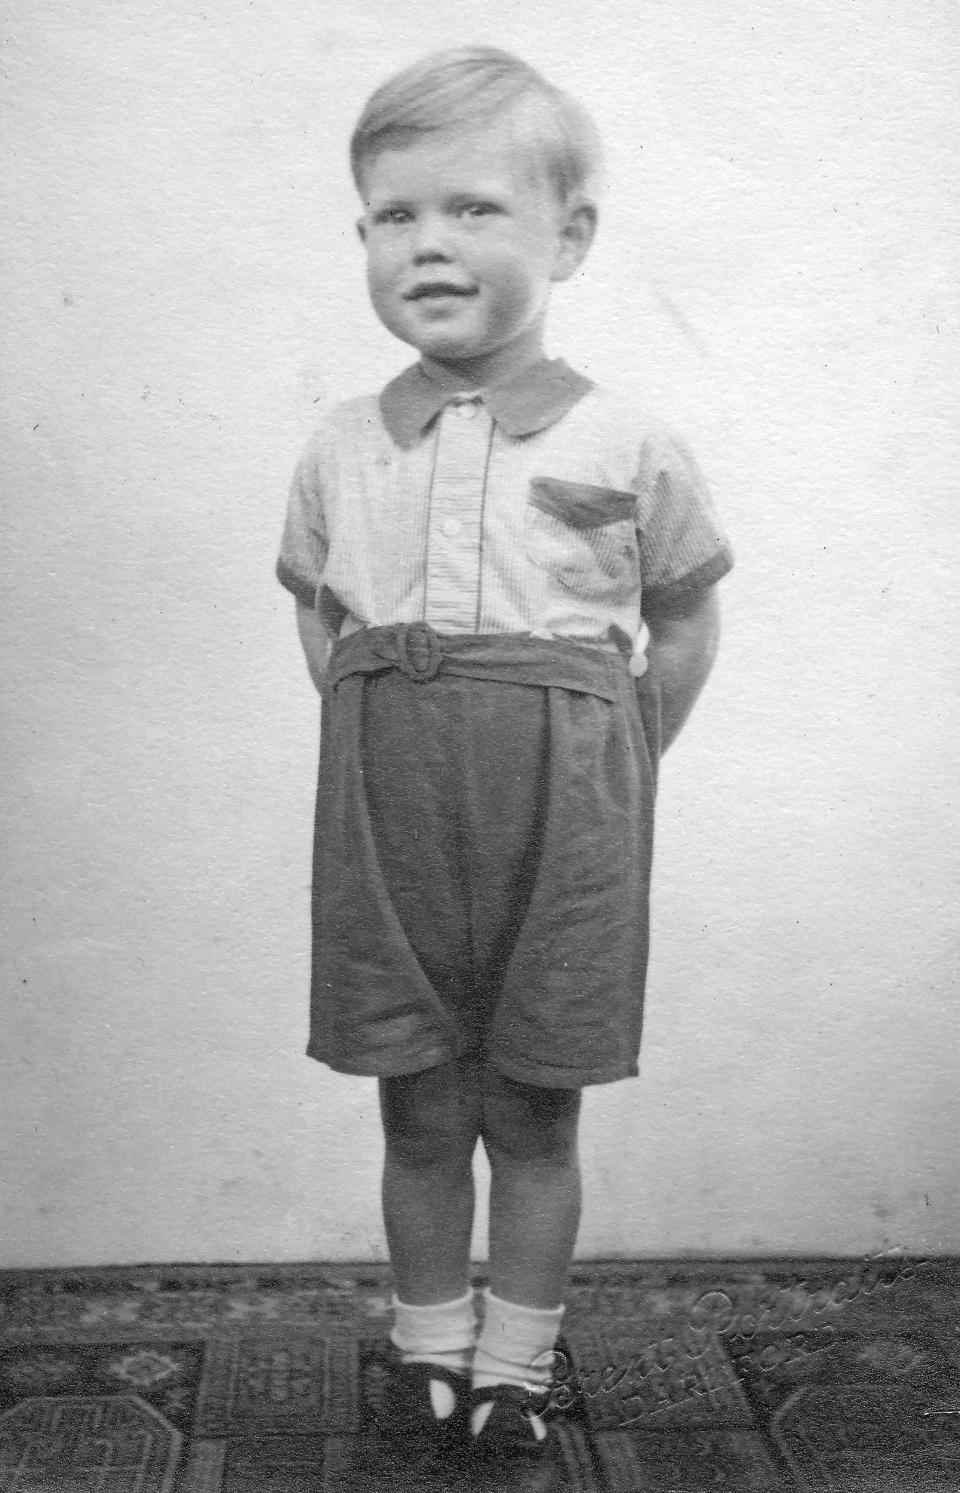 Mick Jagger, aged 3, at home in Brent Lane, Dartford (1946). (Stones Archive / Getty Images)